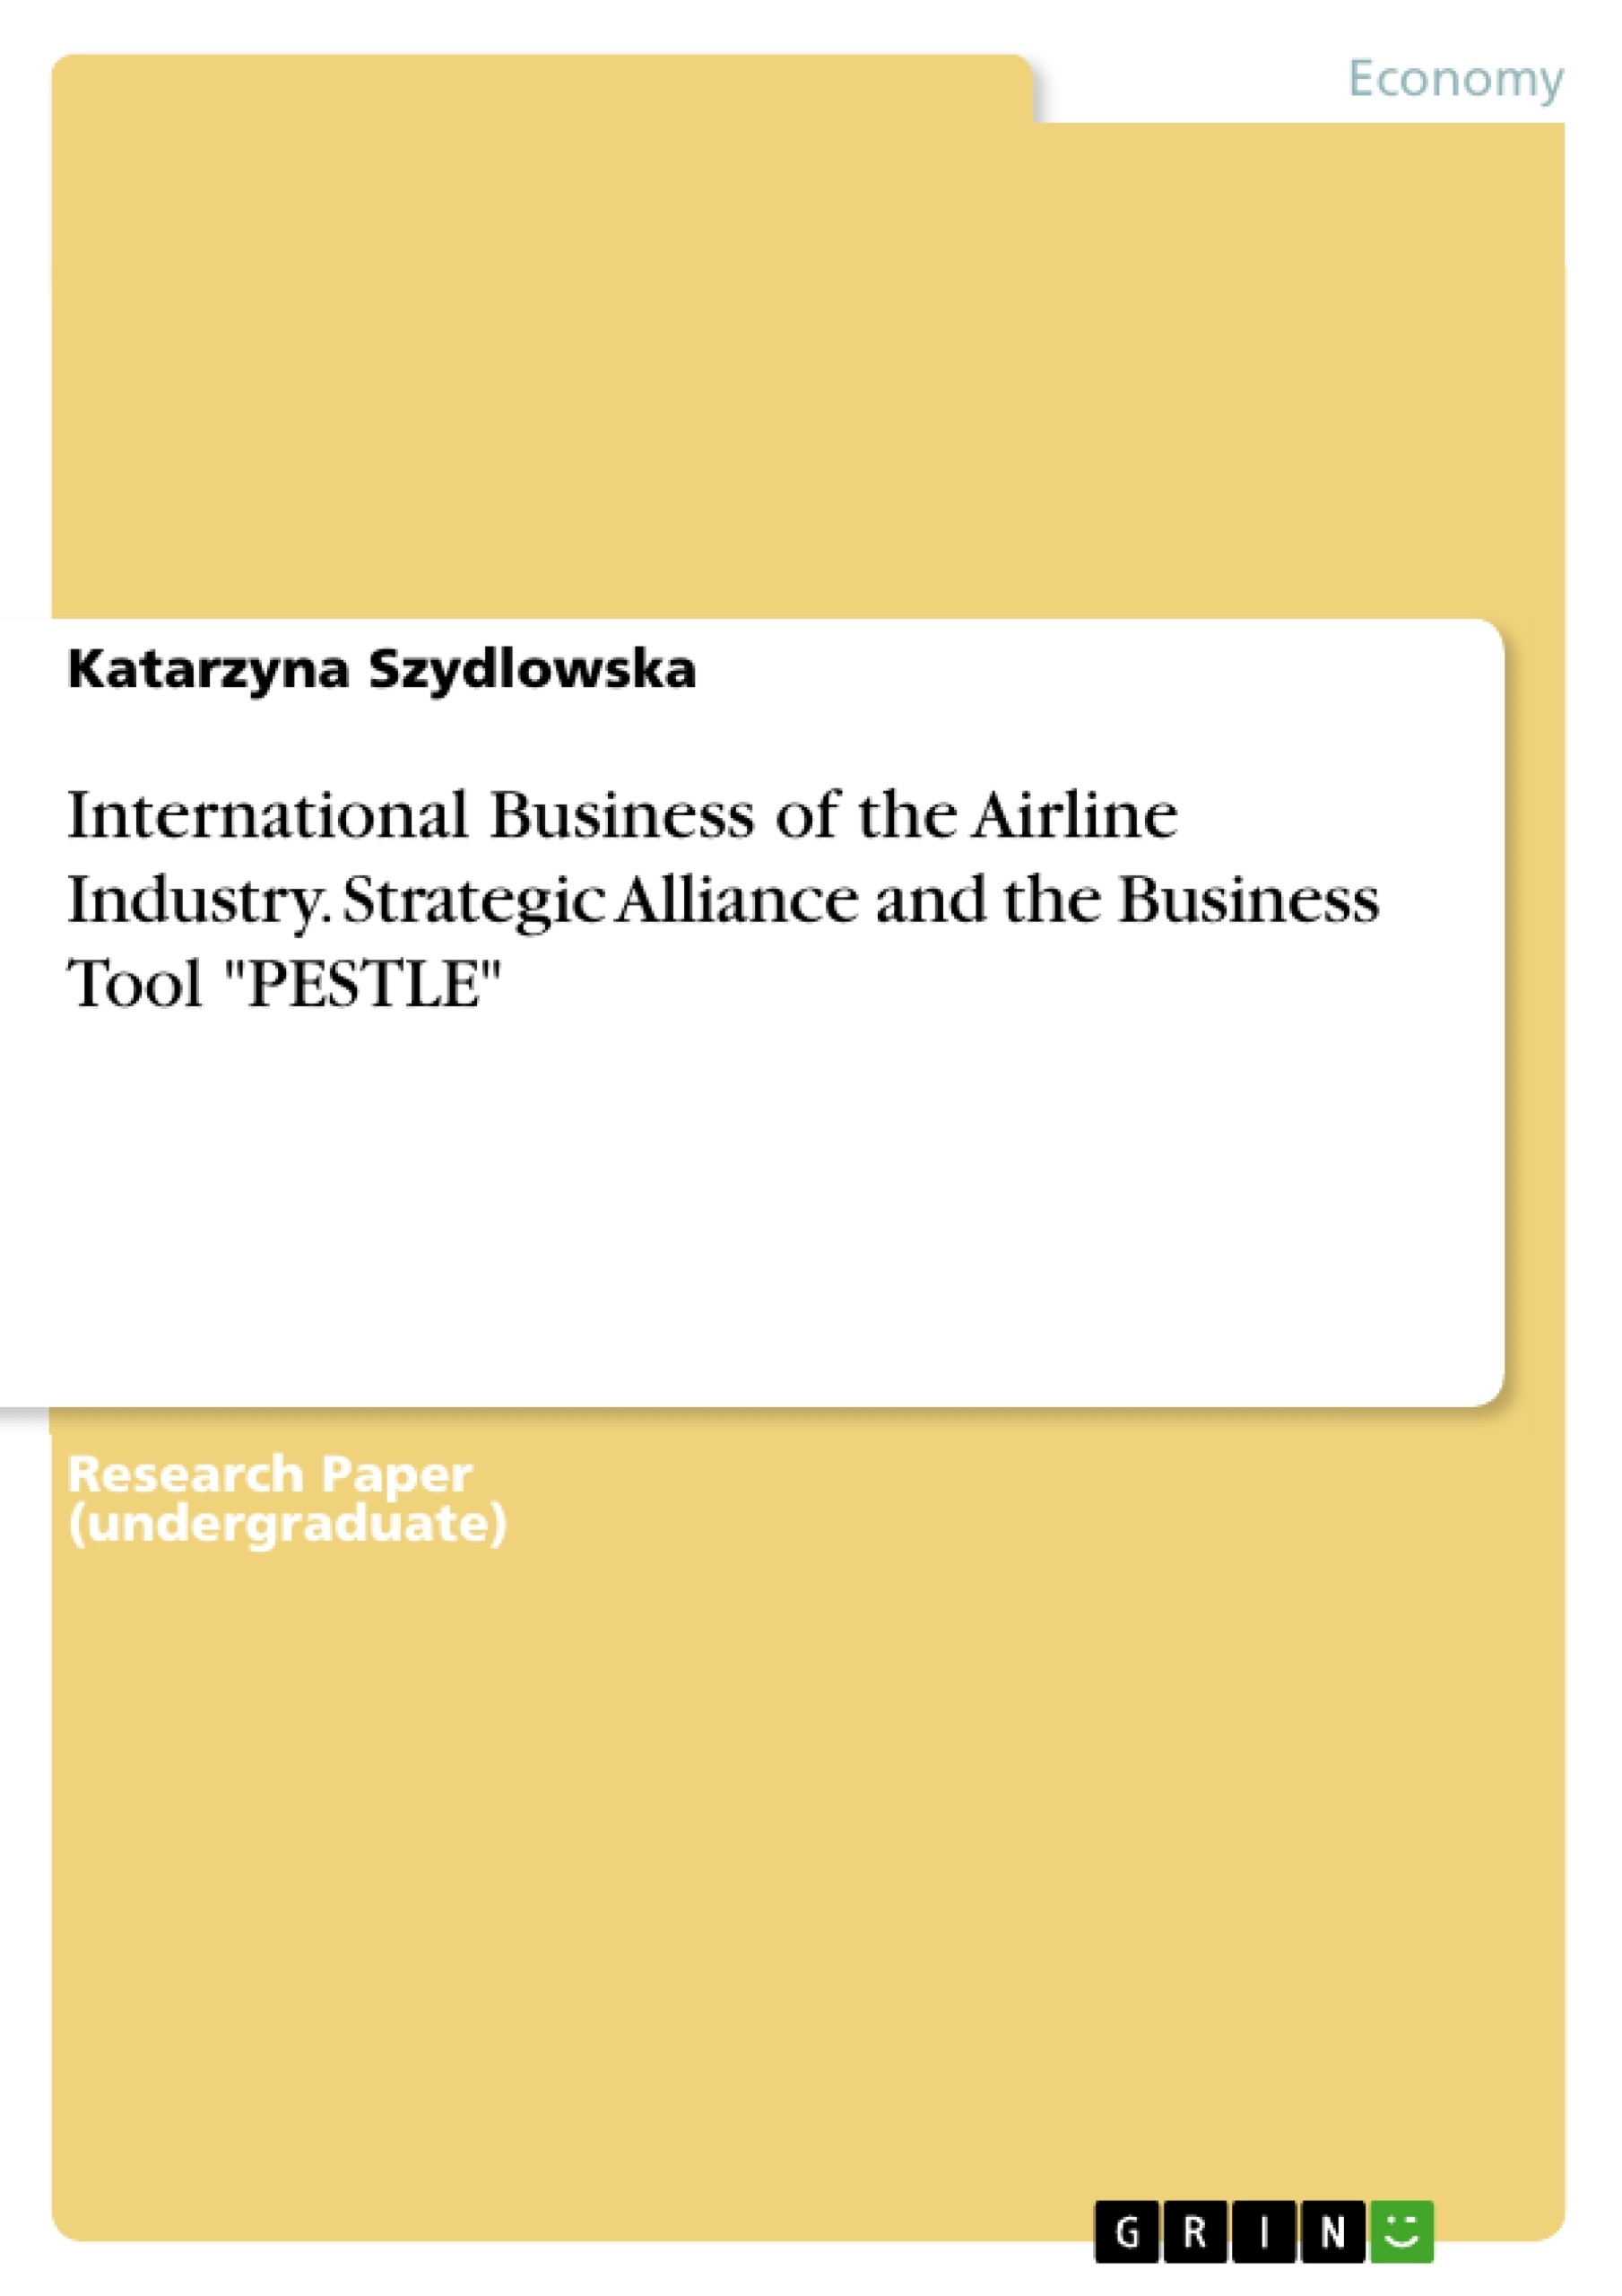 Titre: International Business of the Airline Industry. Strategic Alliance and the Business Tool "PESTLE"